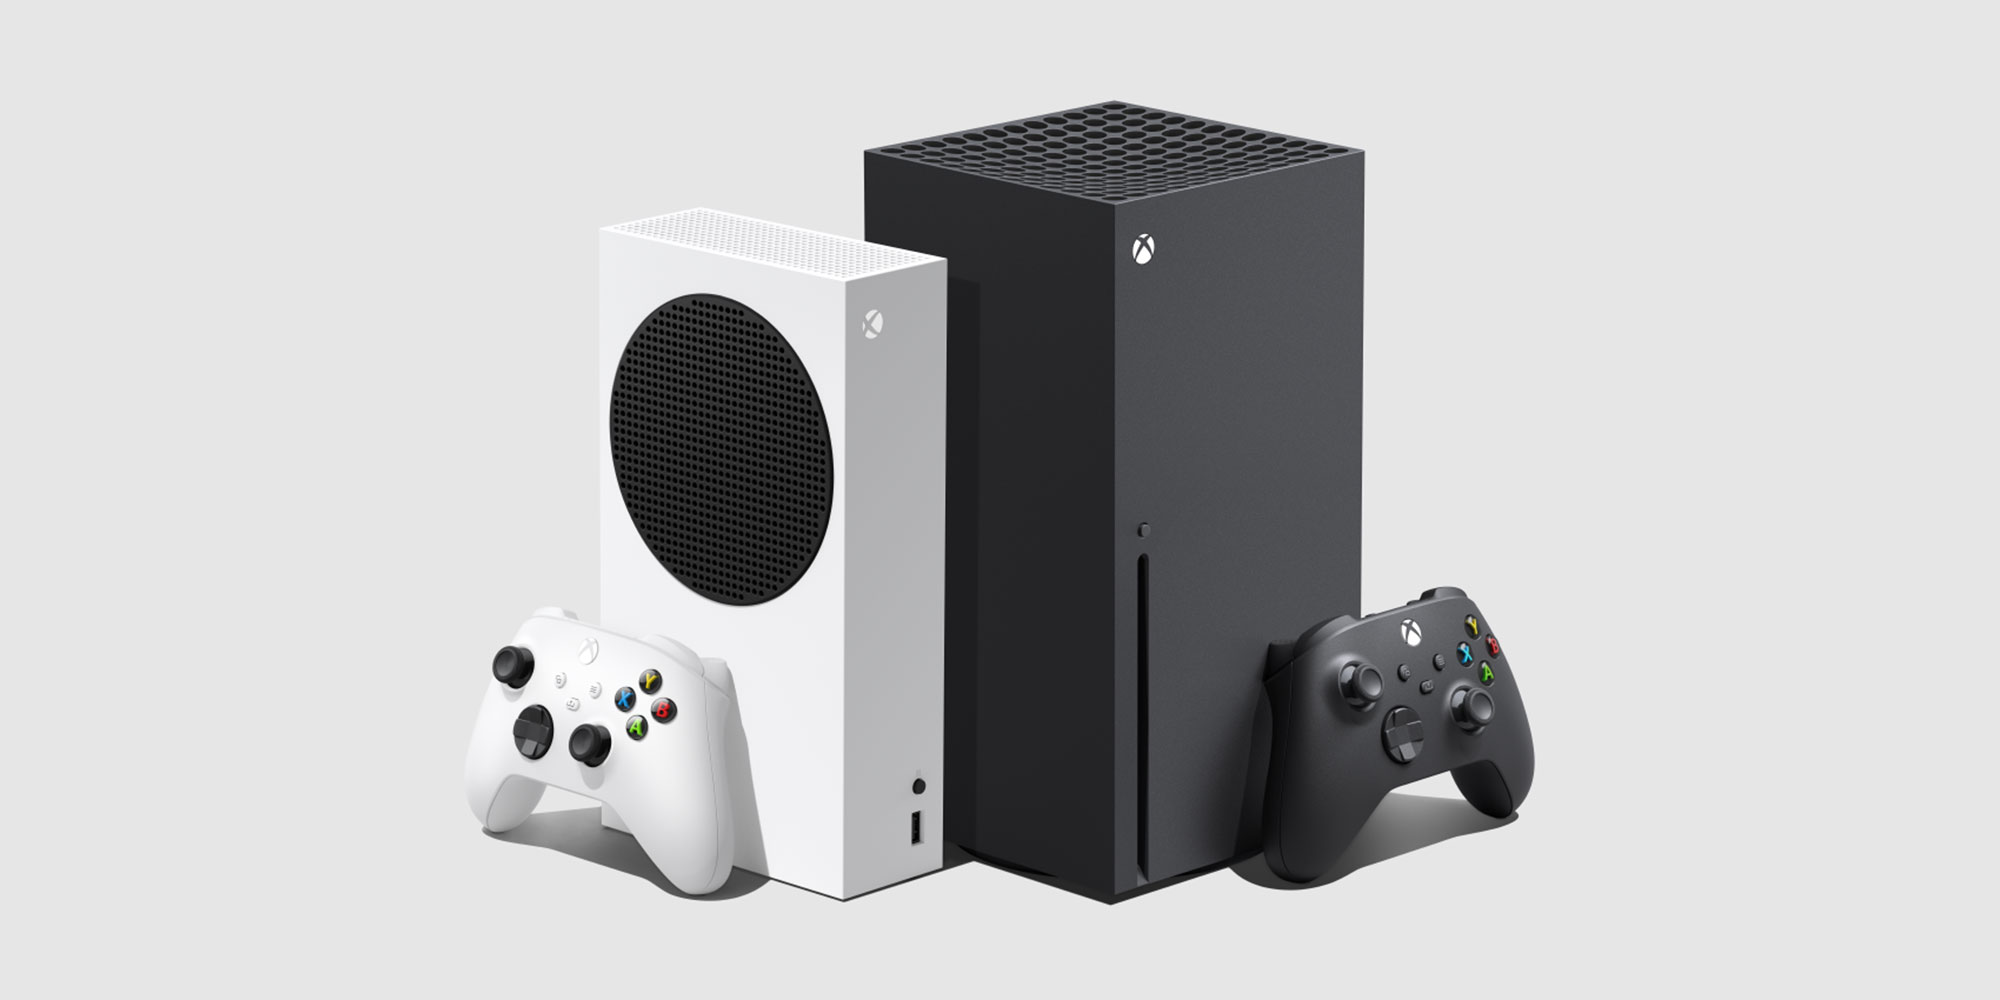 Xbox Series S consoles now $50 off ahead of Prime Day at $250 